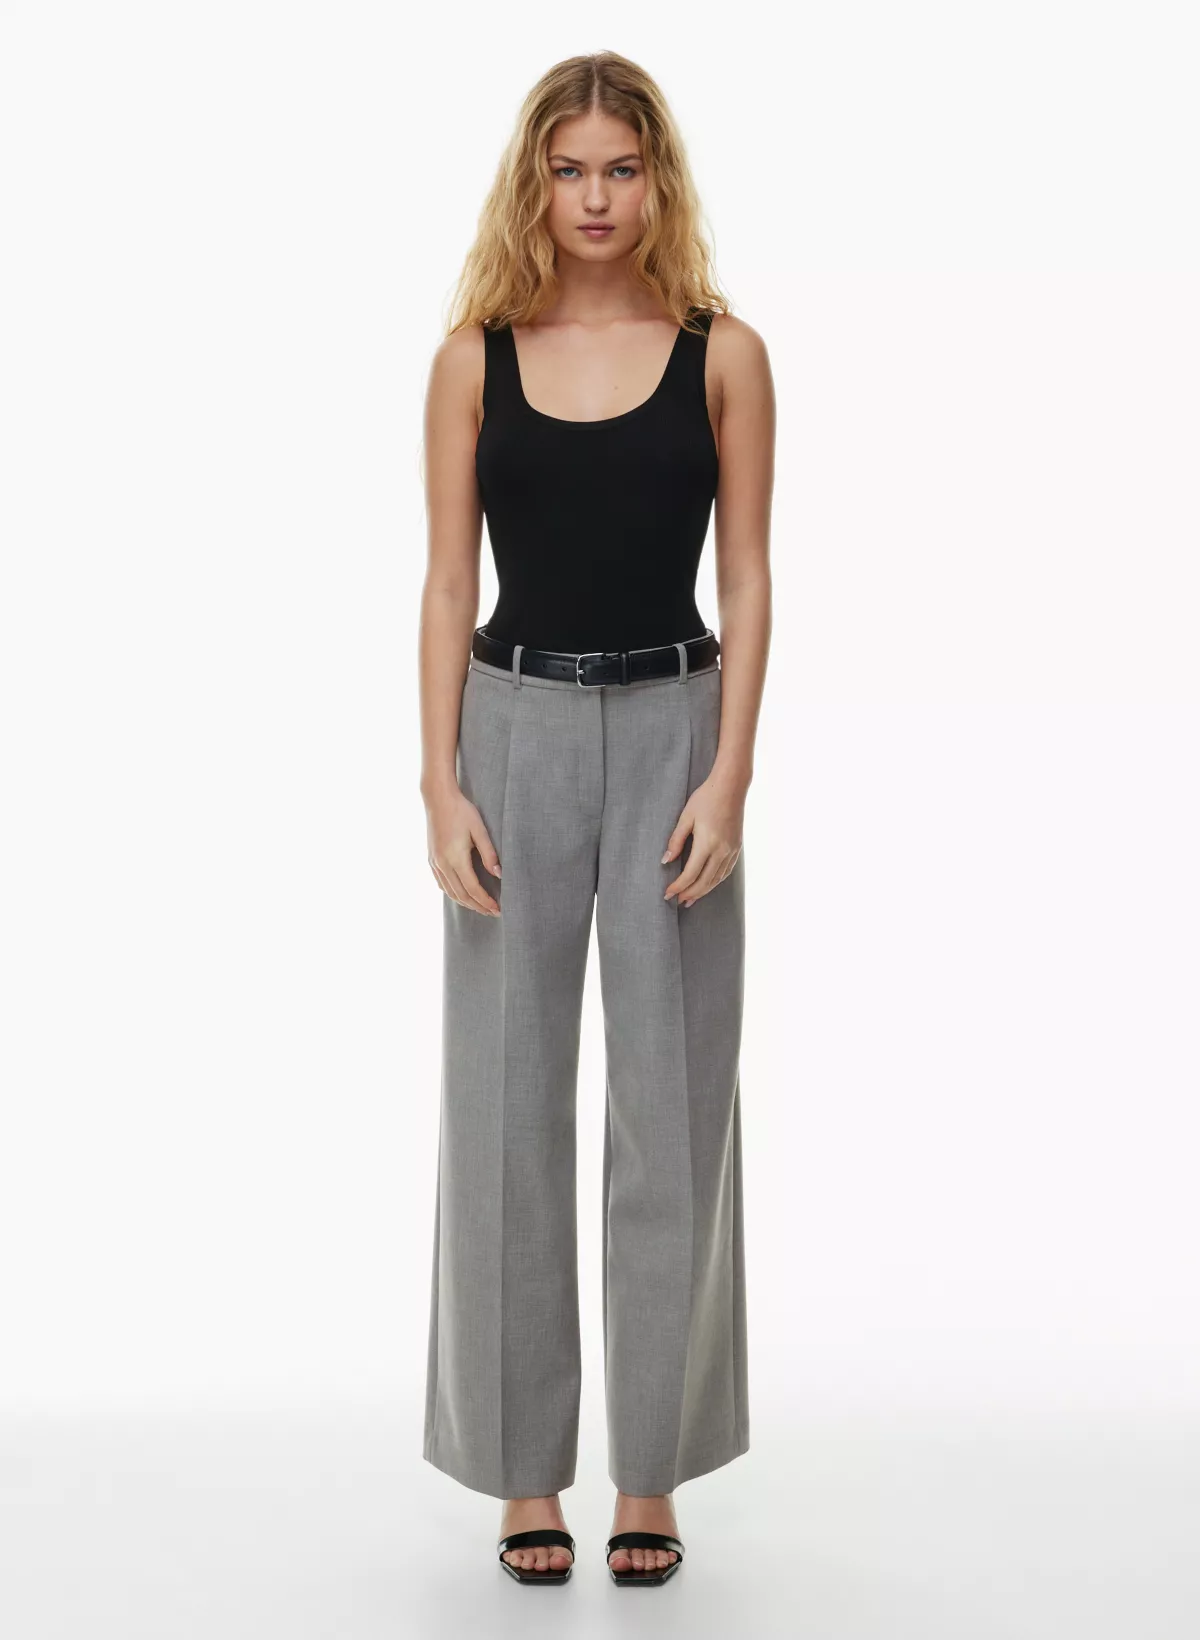 Babaton Decade Pant Relaxed, mid-rise wide-leg softly structured pants